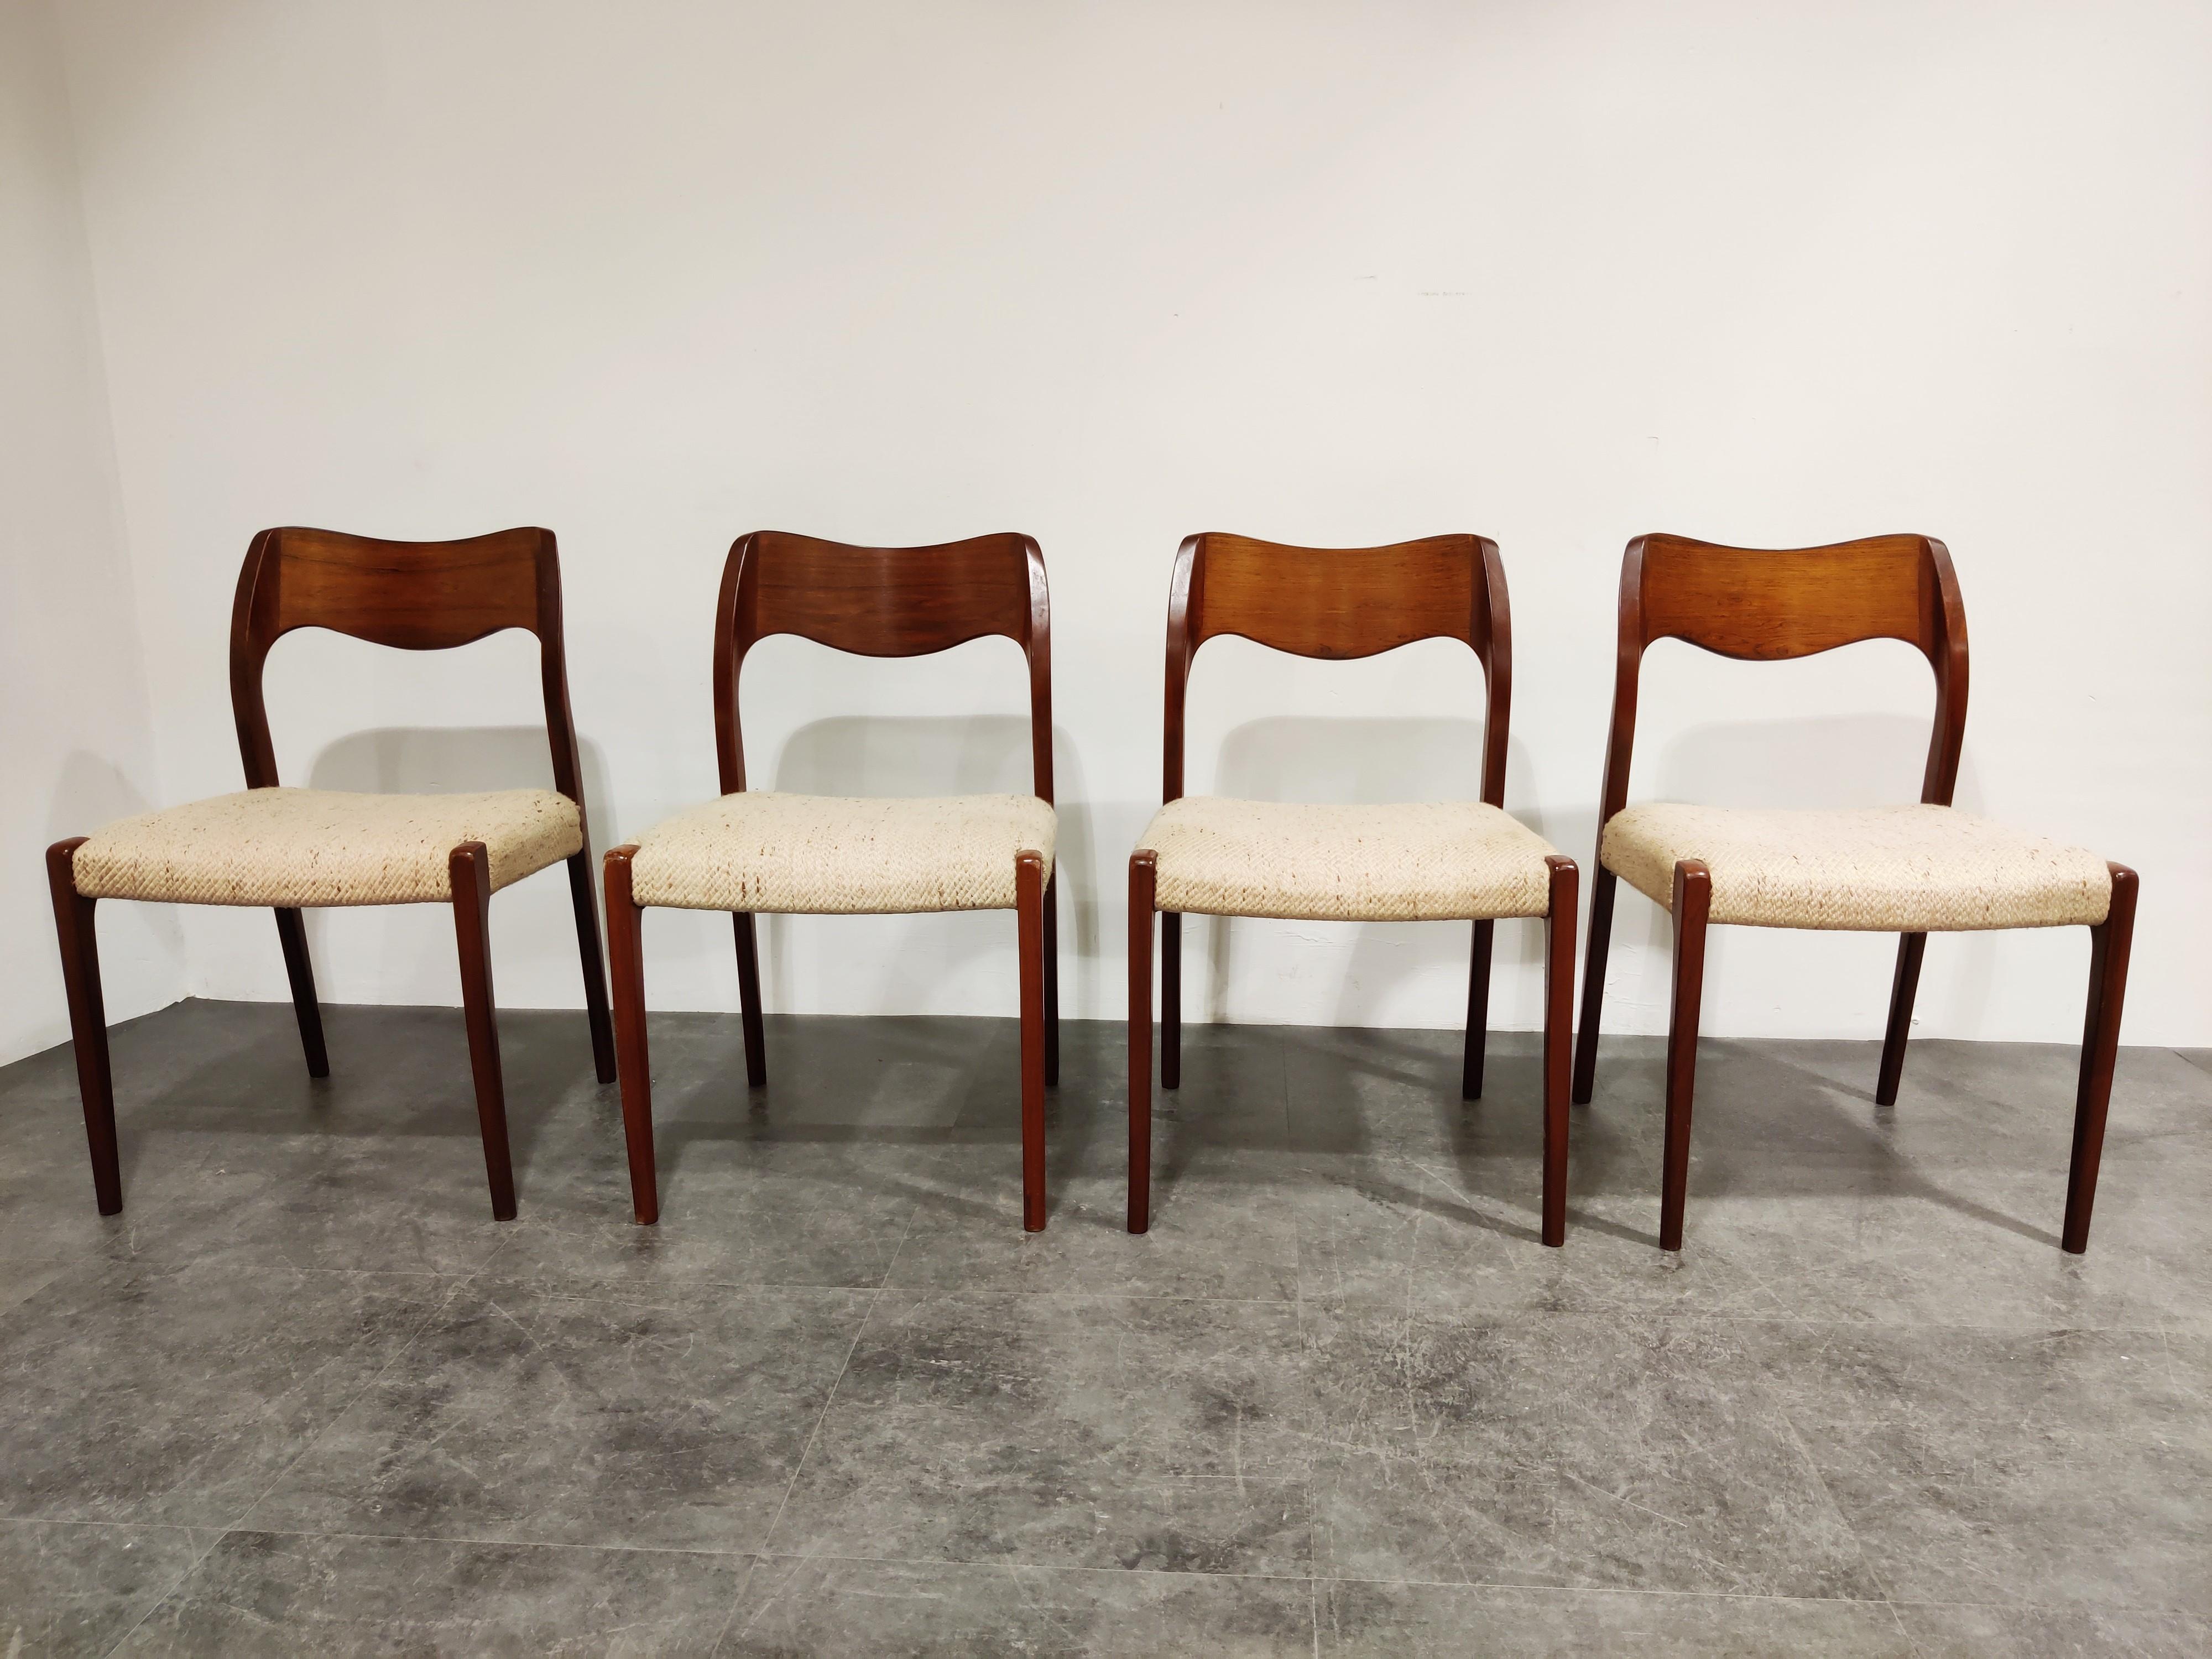 Elegantly shaped set of 4 dining chairs designed by Niels Otto Møller for JL. Mollers.

Beautiful organic shaped teak wood with original beige fabric upholstery.

Good original condition with minor wear, no rips or heavy staining on the